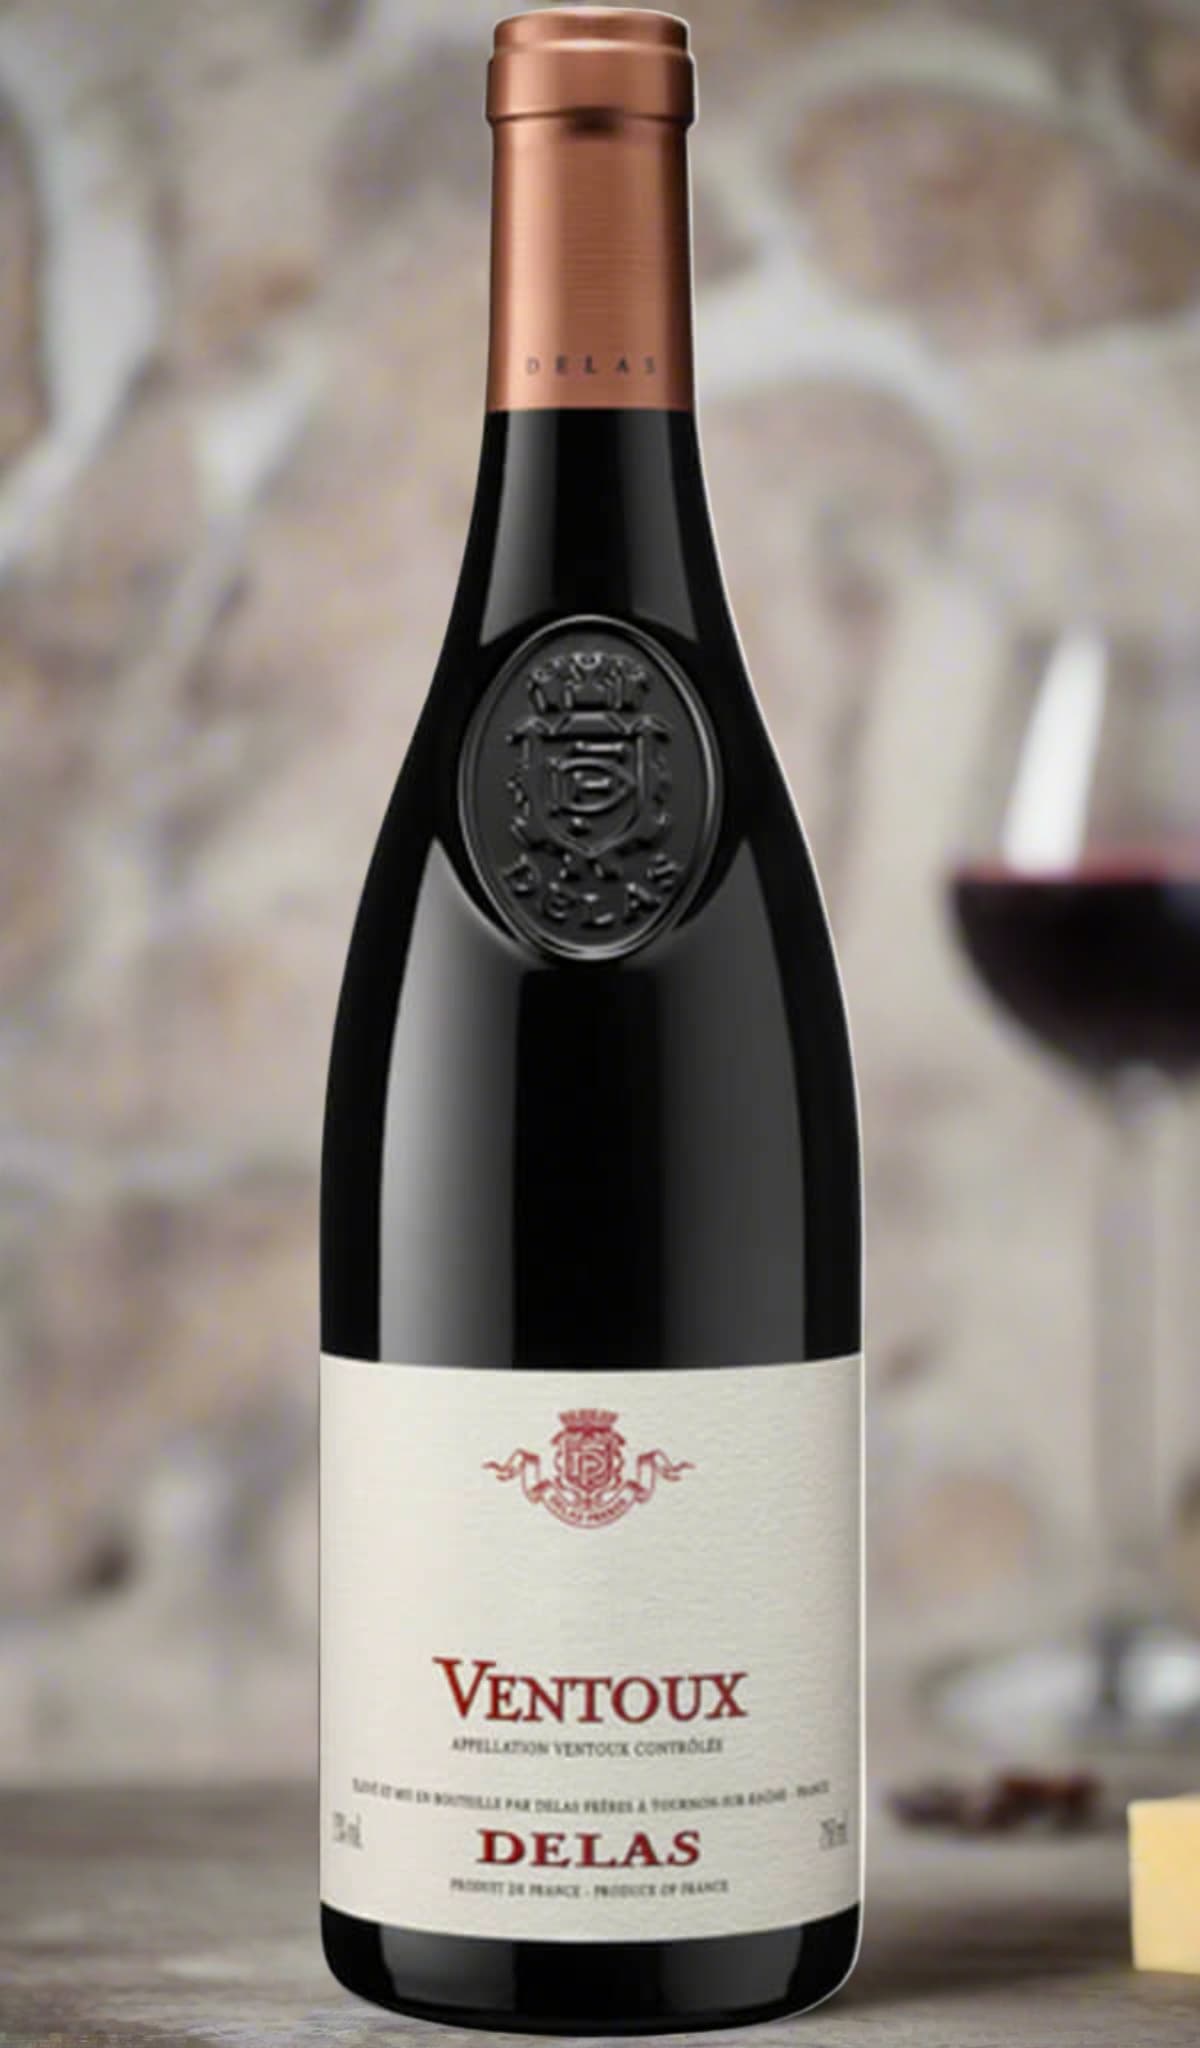 Find out more or purchase Delas Ventoux Rouge 2021 online at Wine Sellers Direct - Australia's independent liquor specialists.